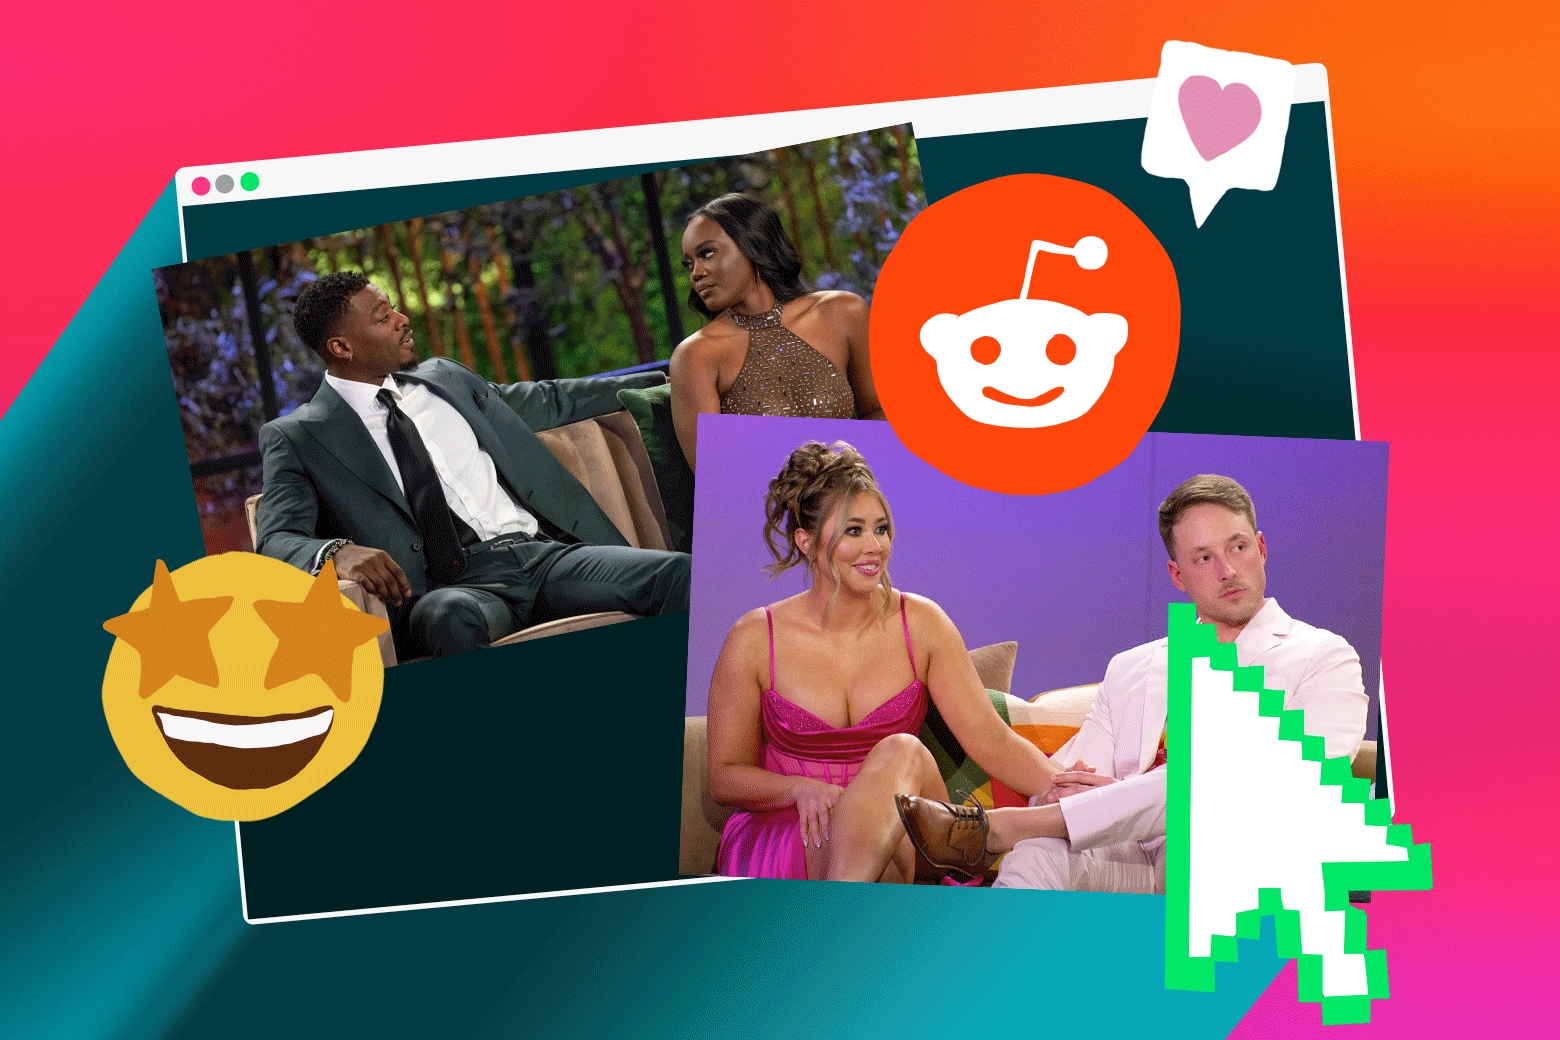 Reddit is the Real Host of “Love is Blind” Candice Lim and Rachelle Hampton